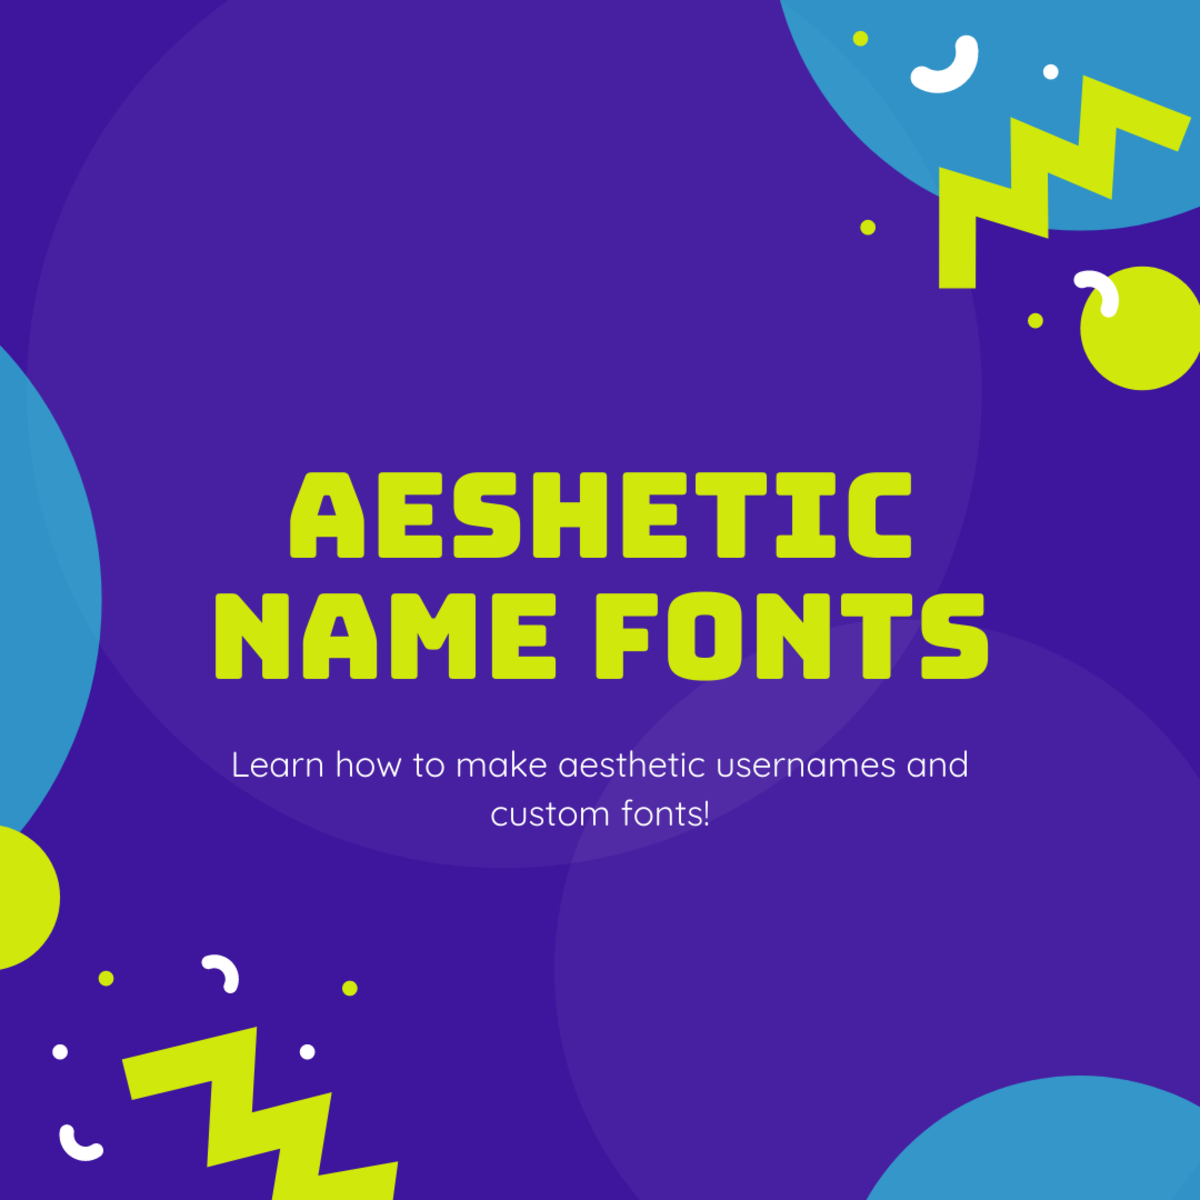 How to Create a Discord Name Font: The Ultimate Guide